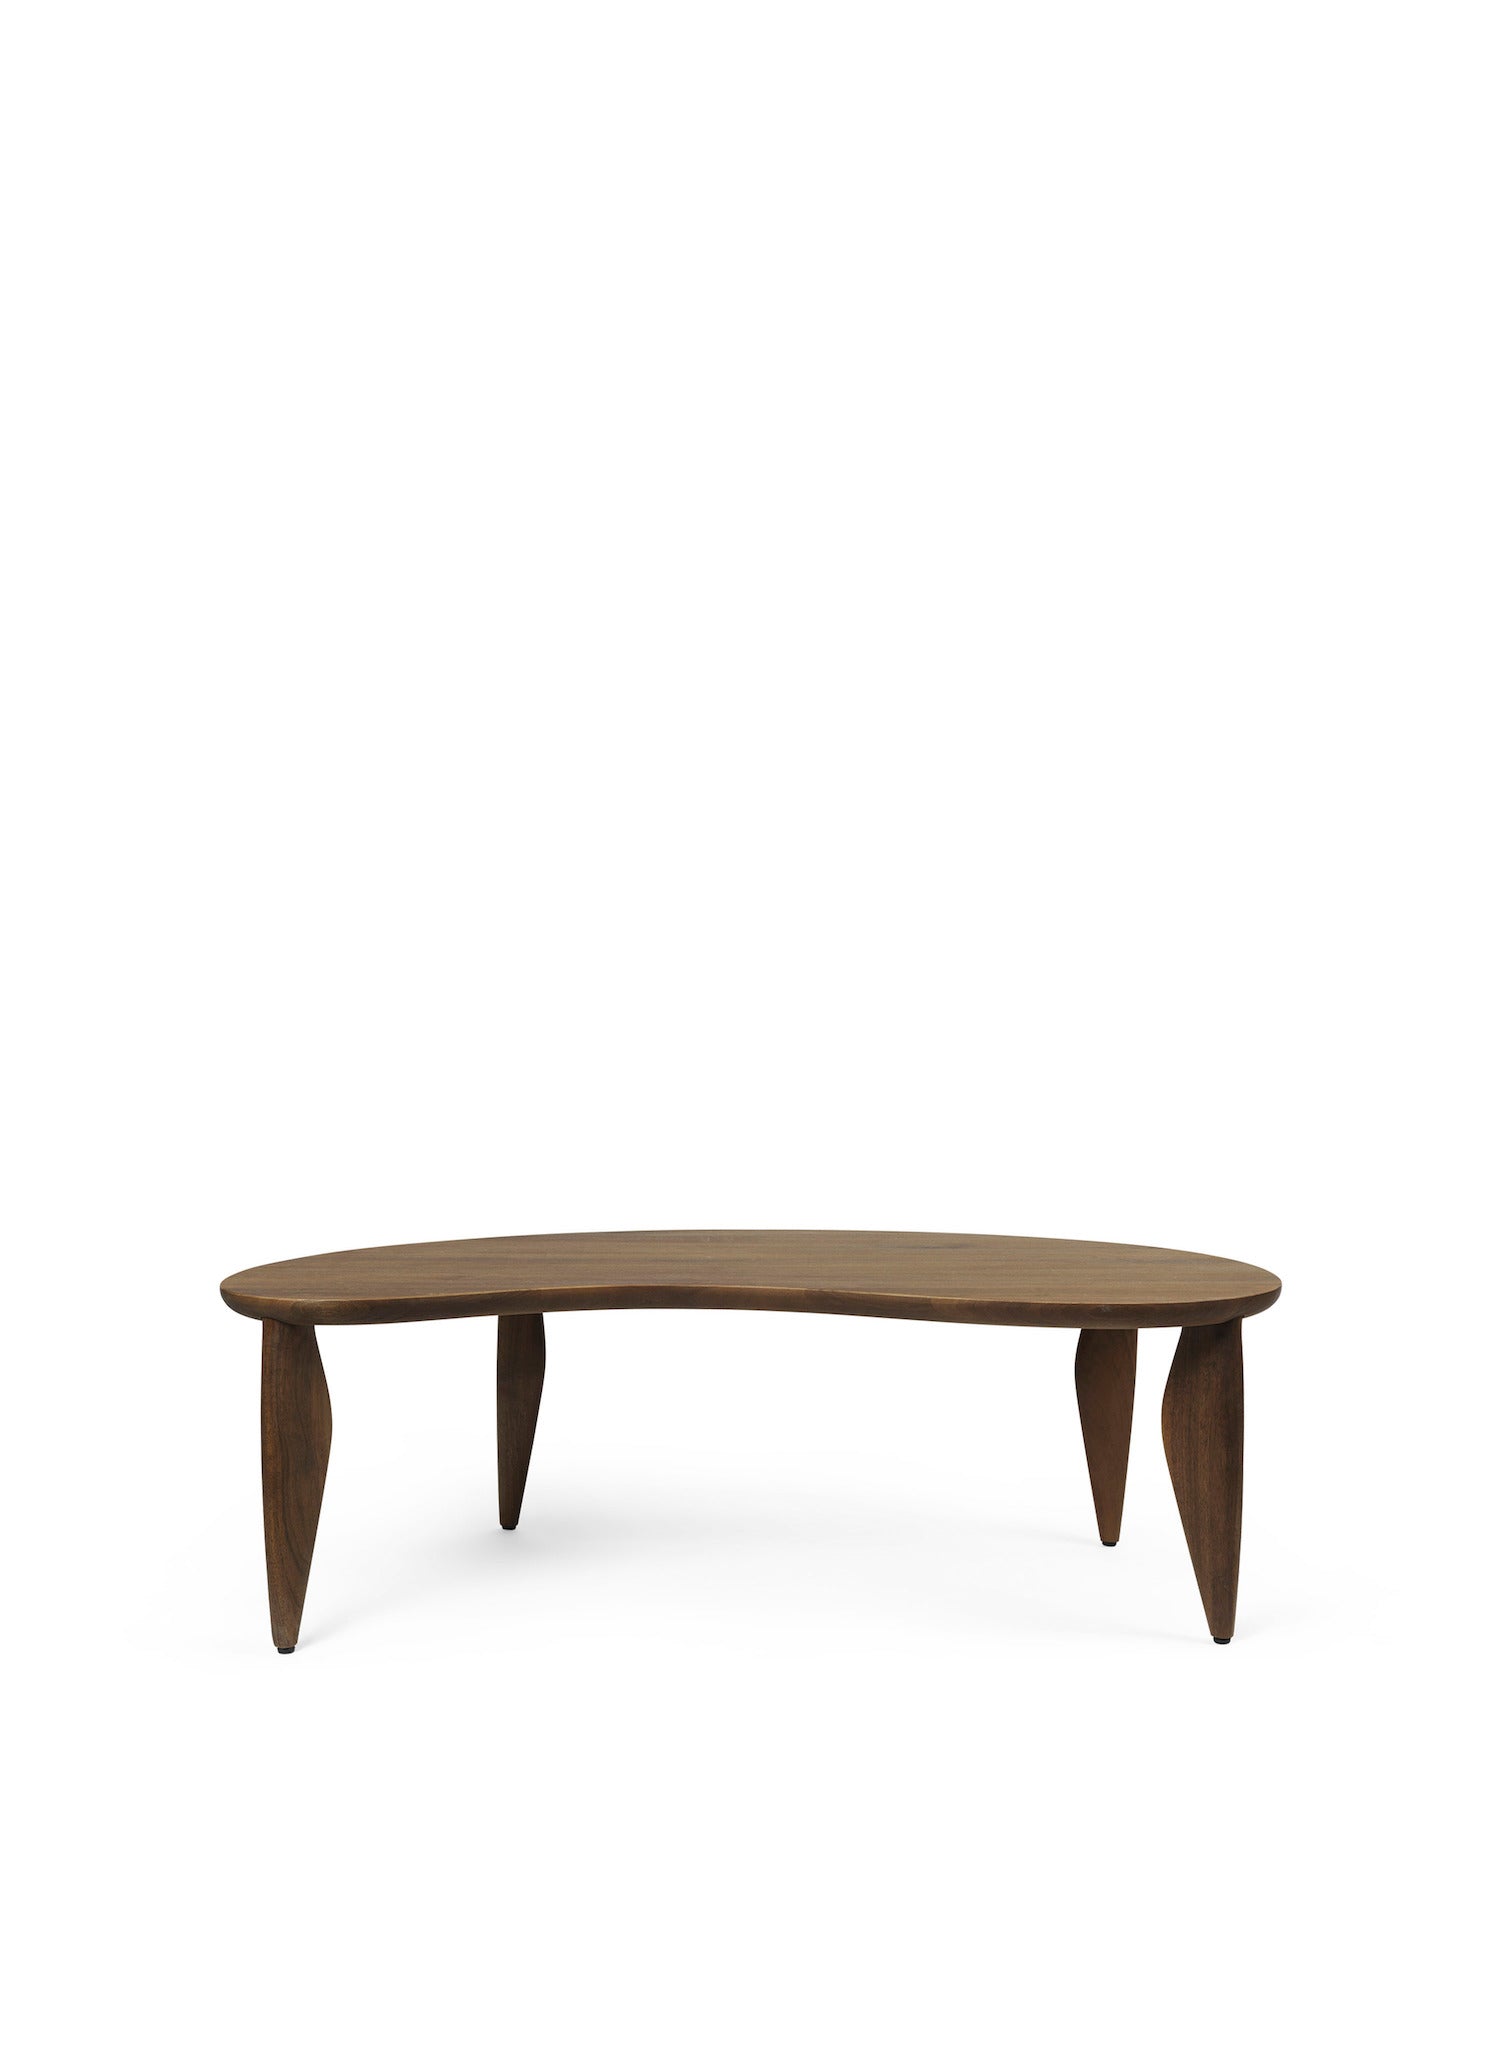 Feve Coffee Table. Made from solid FSC™ certified European Walnut, the Feve Coffee Table has an organic, delicate expression. 